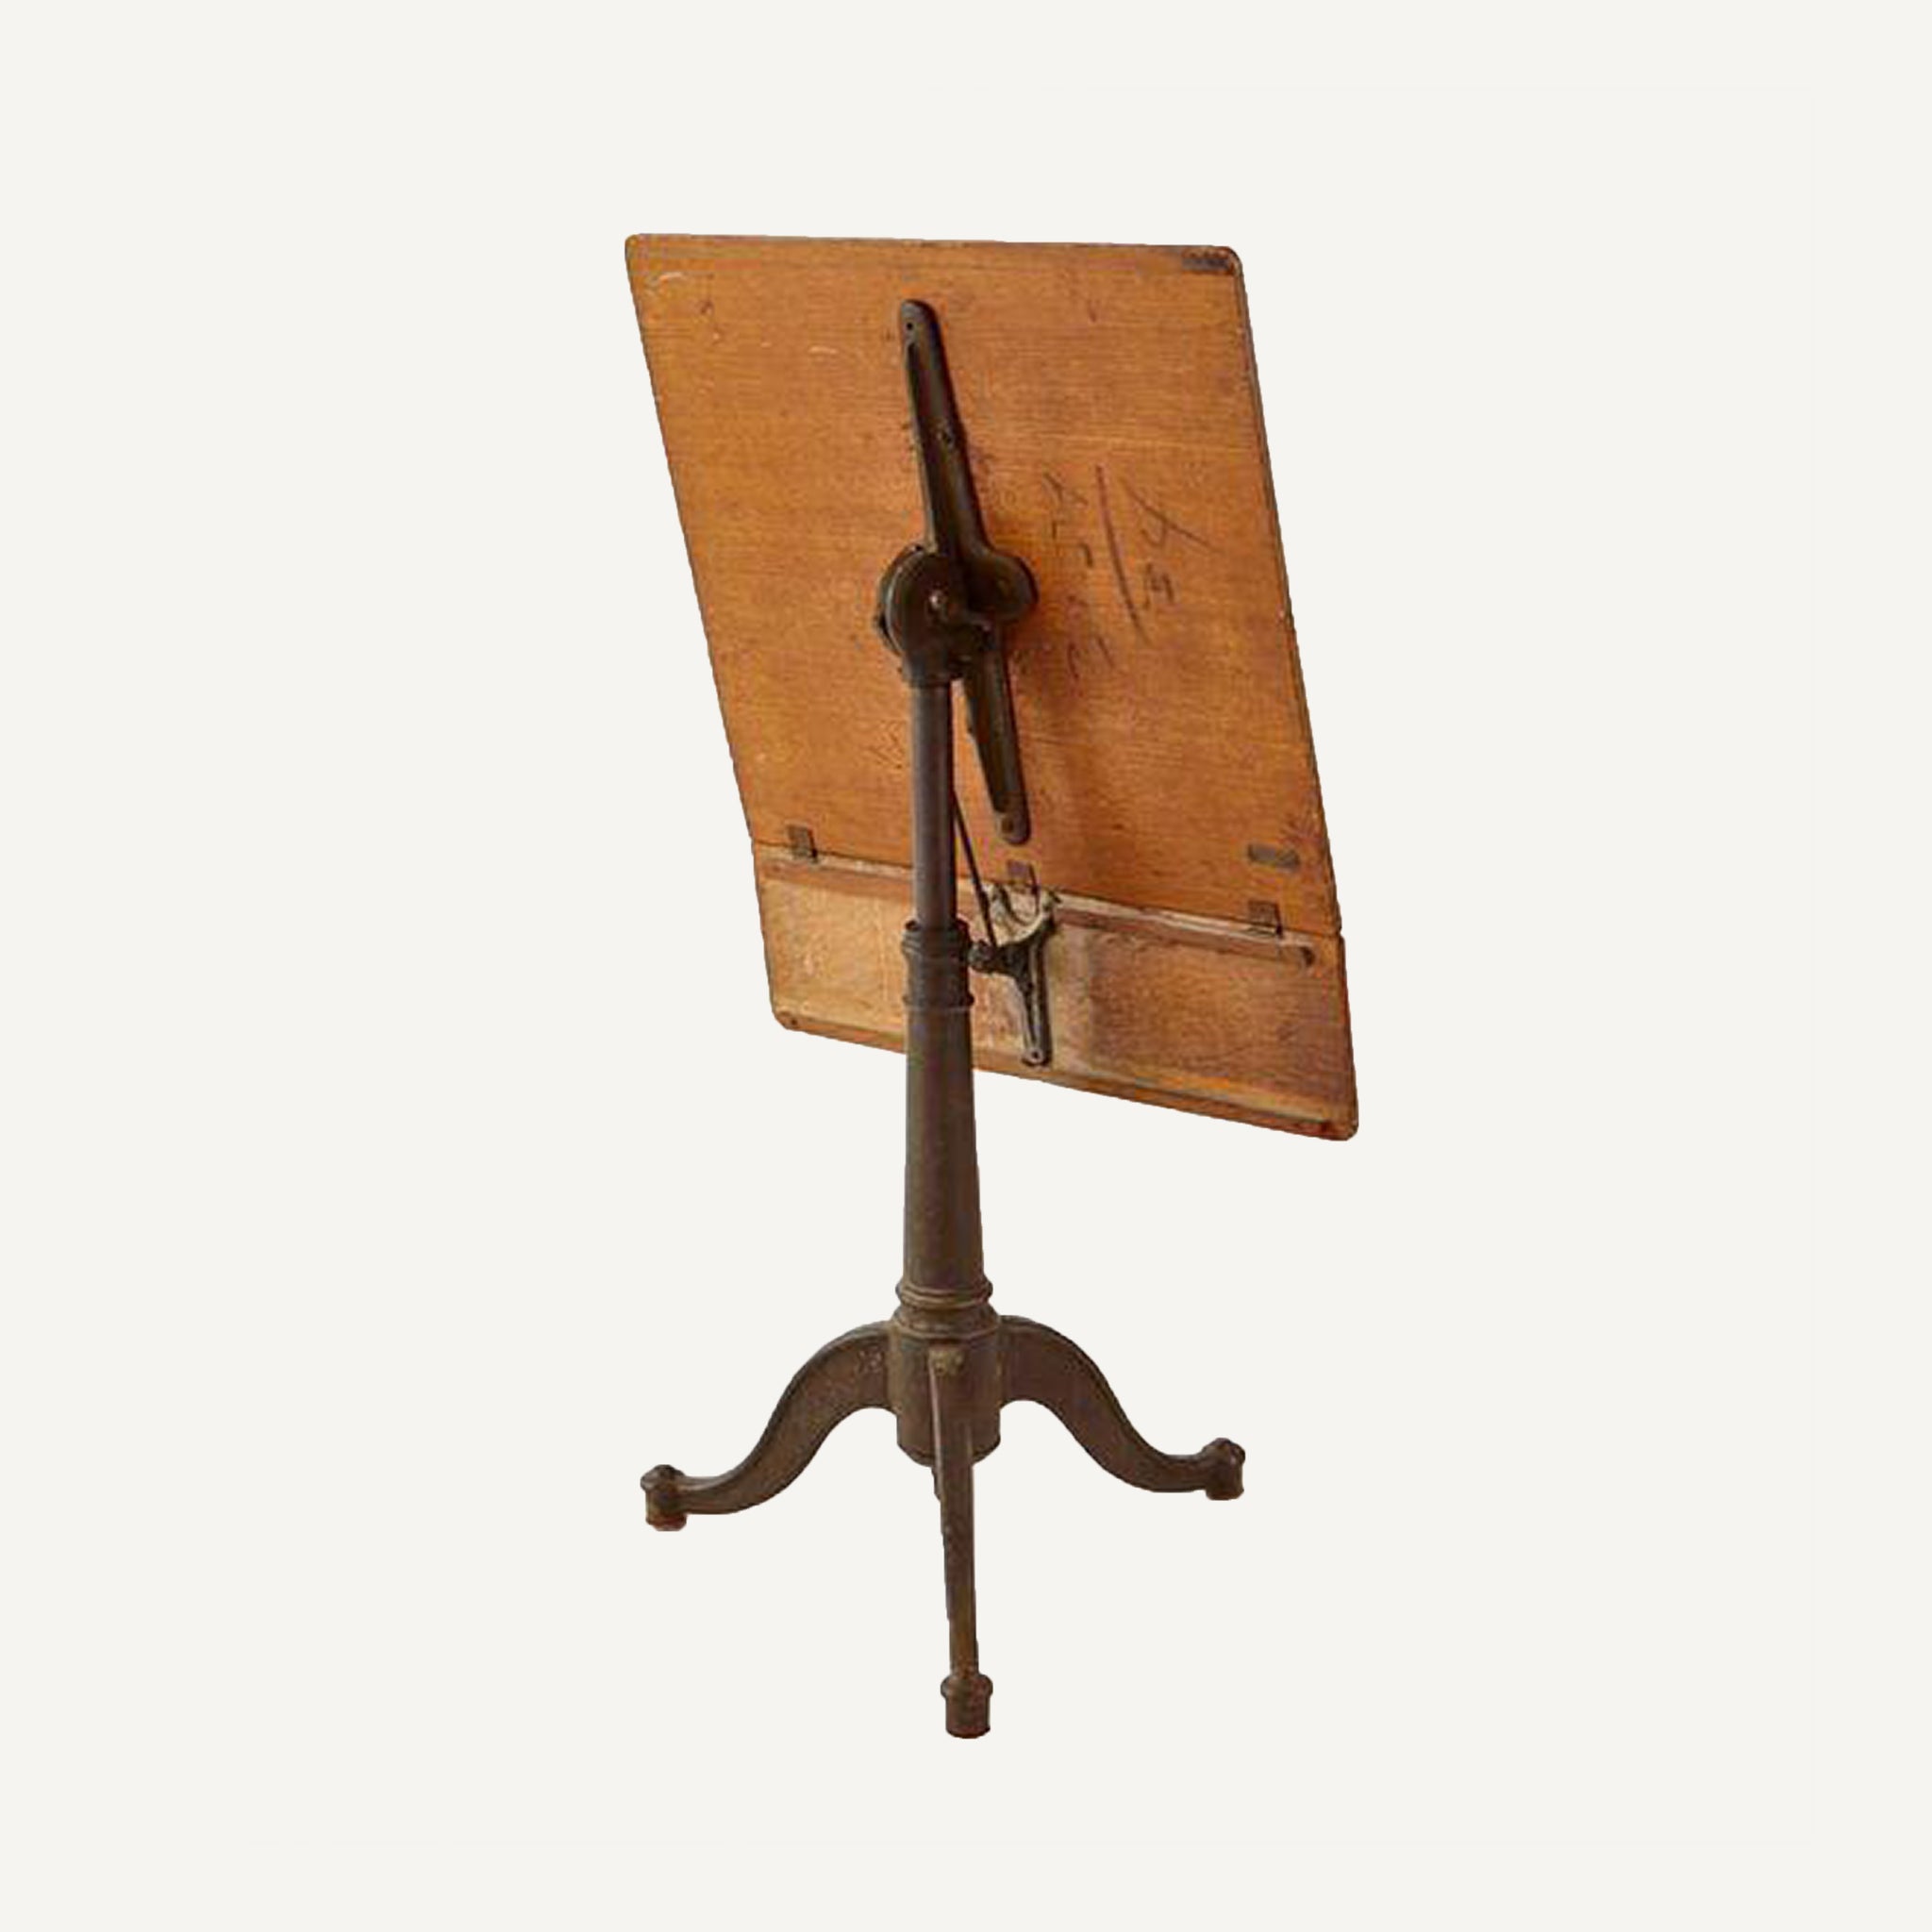 ANTIQUE DRAFTING TABLE